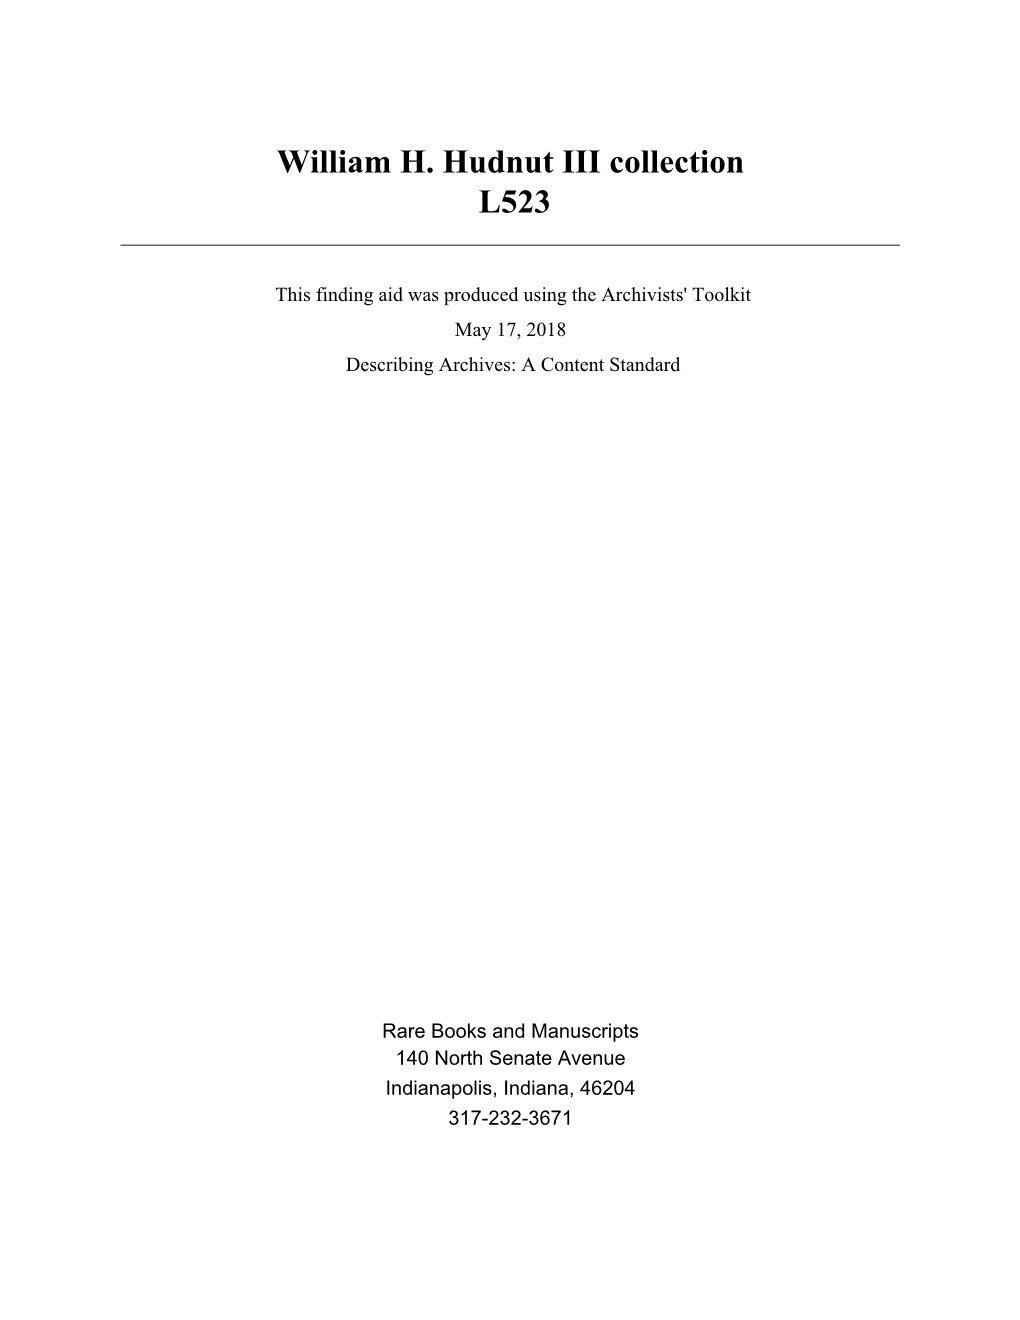 William H. Hudnut III Collection L523